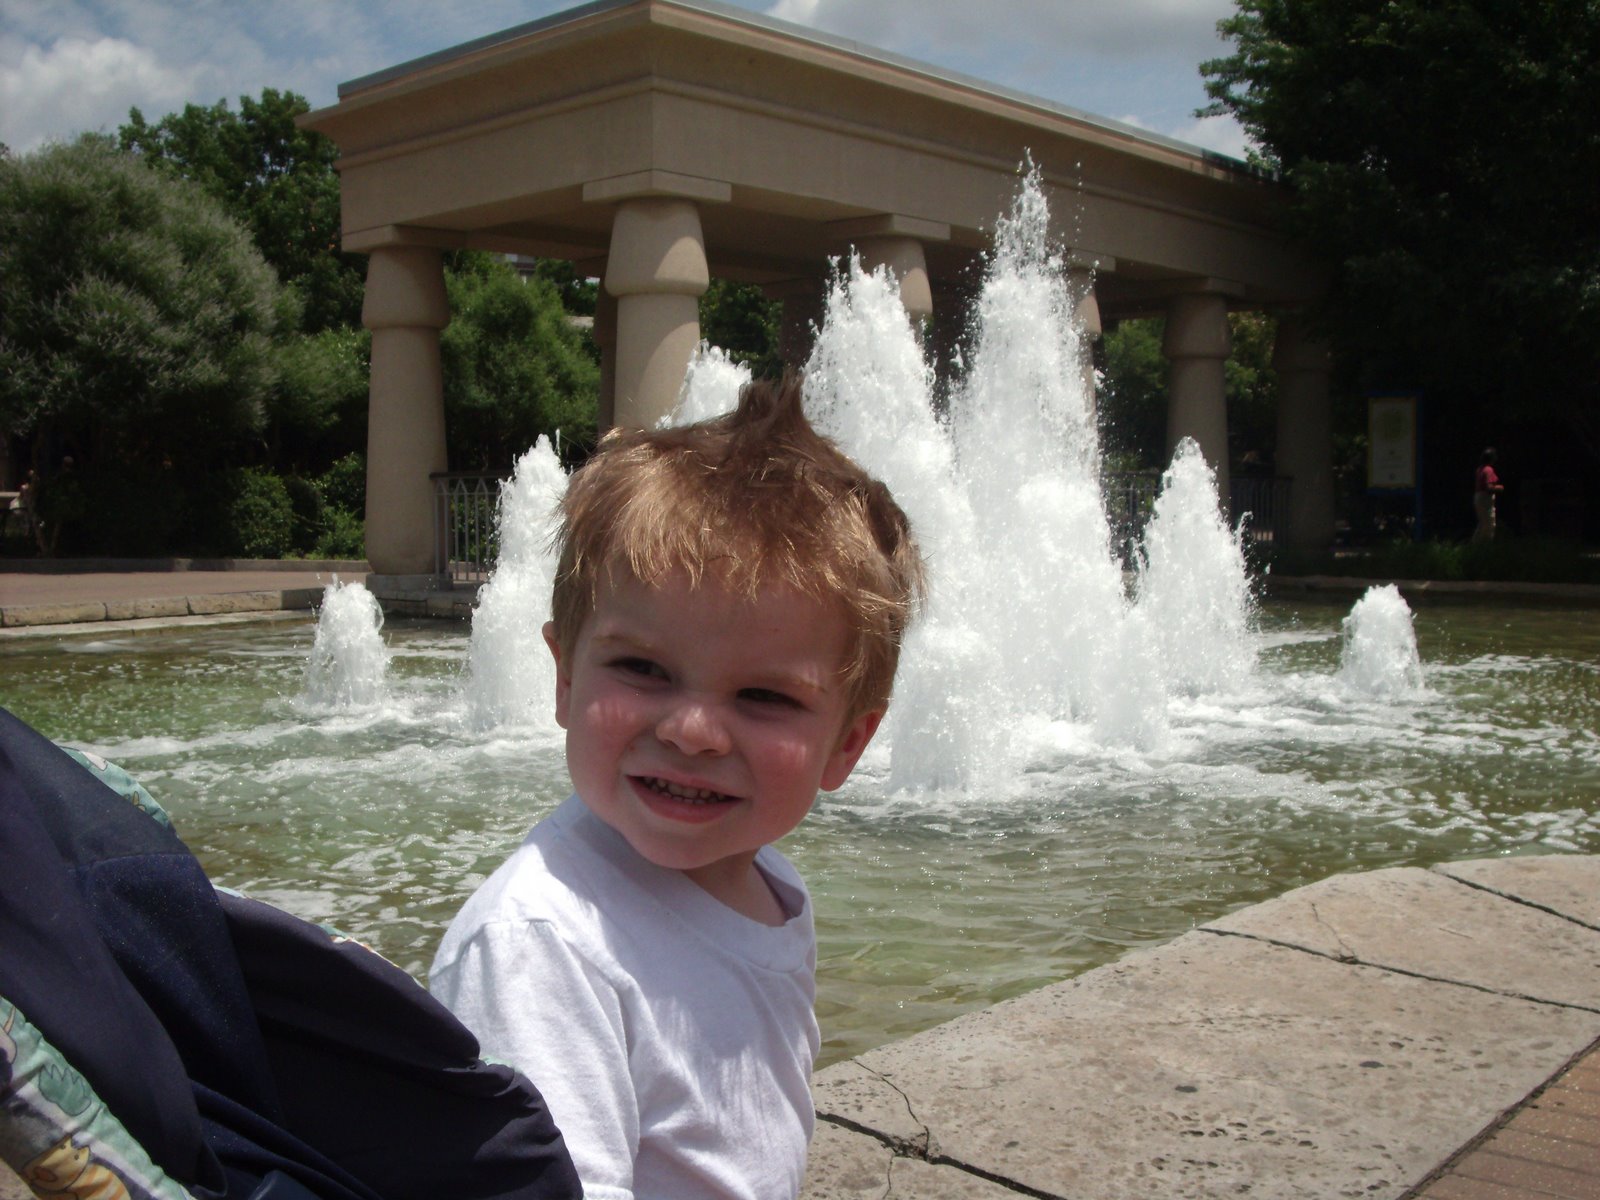 [Carter+in+front+of+water+fountains.jpg]